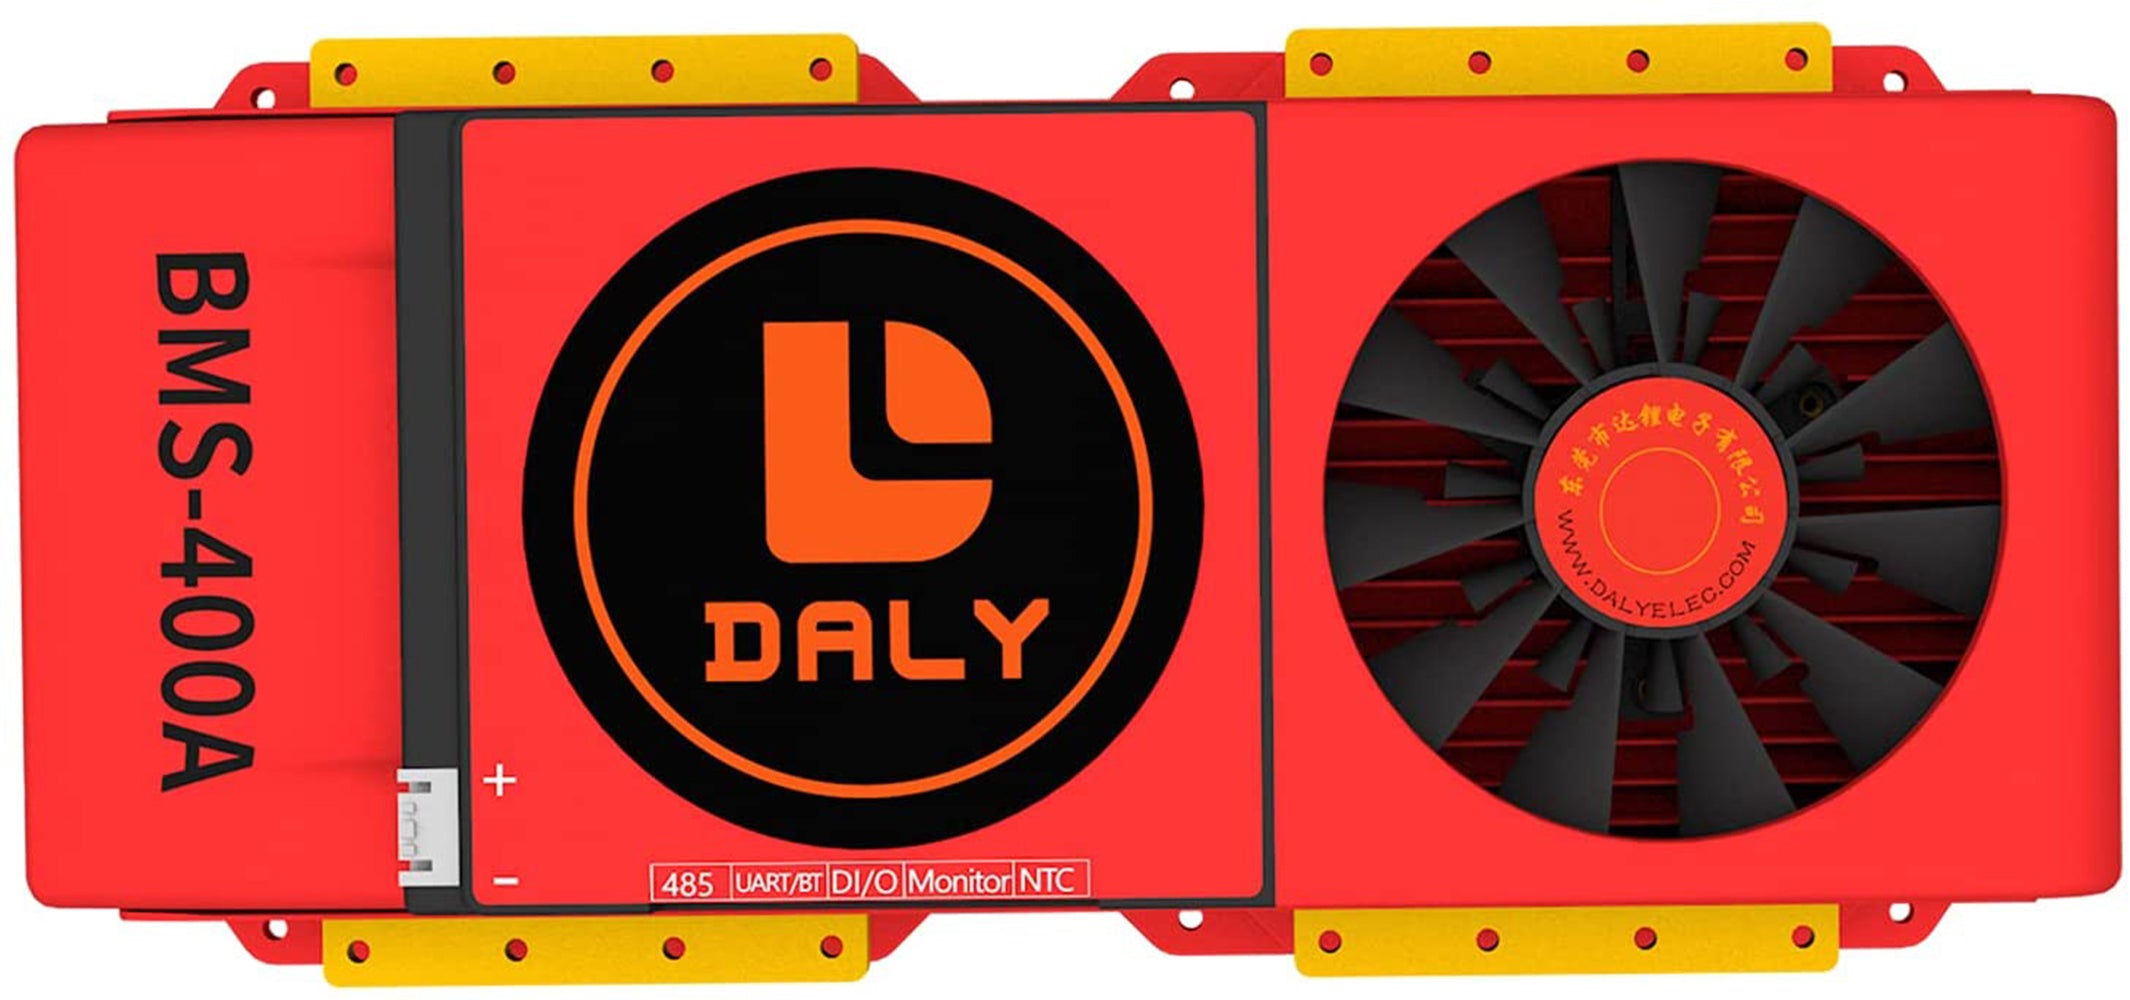 Daly smart bms Lifepo4 4S 12V 400A with Fan bluetooth 52130257